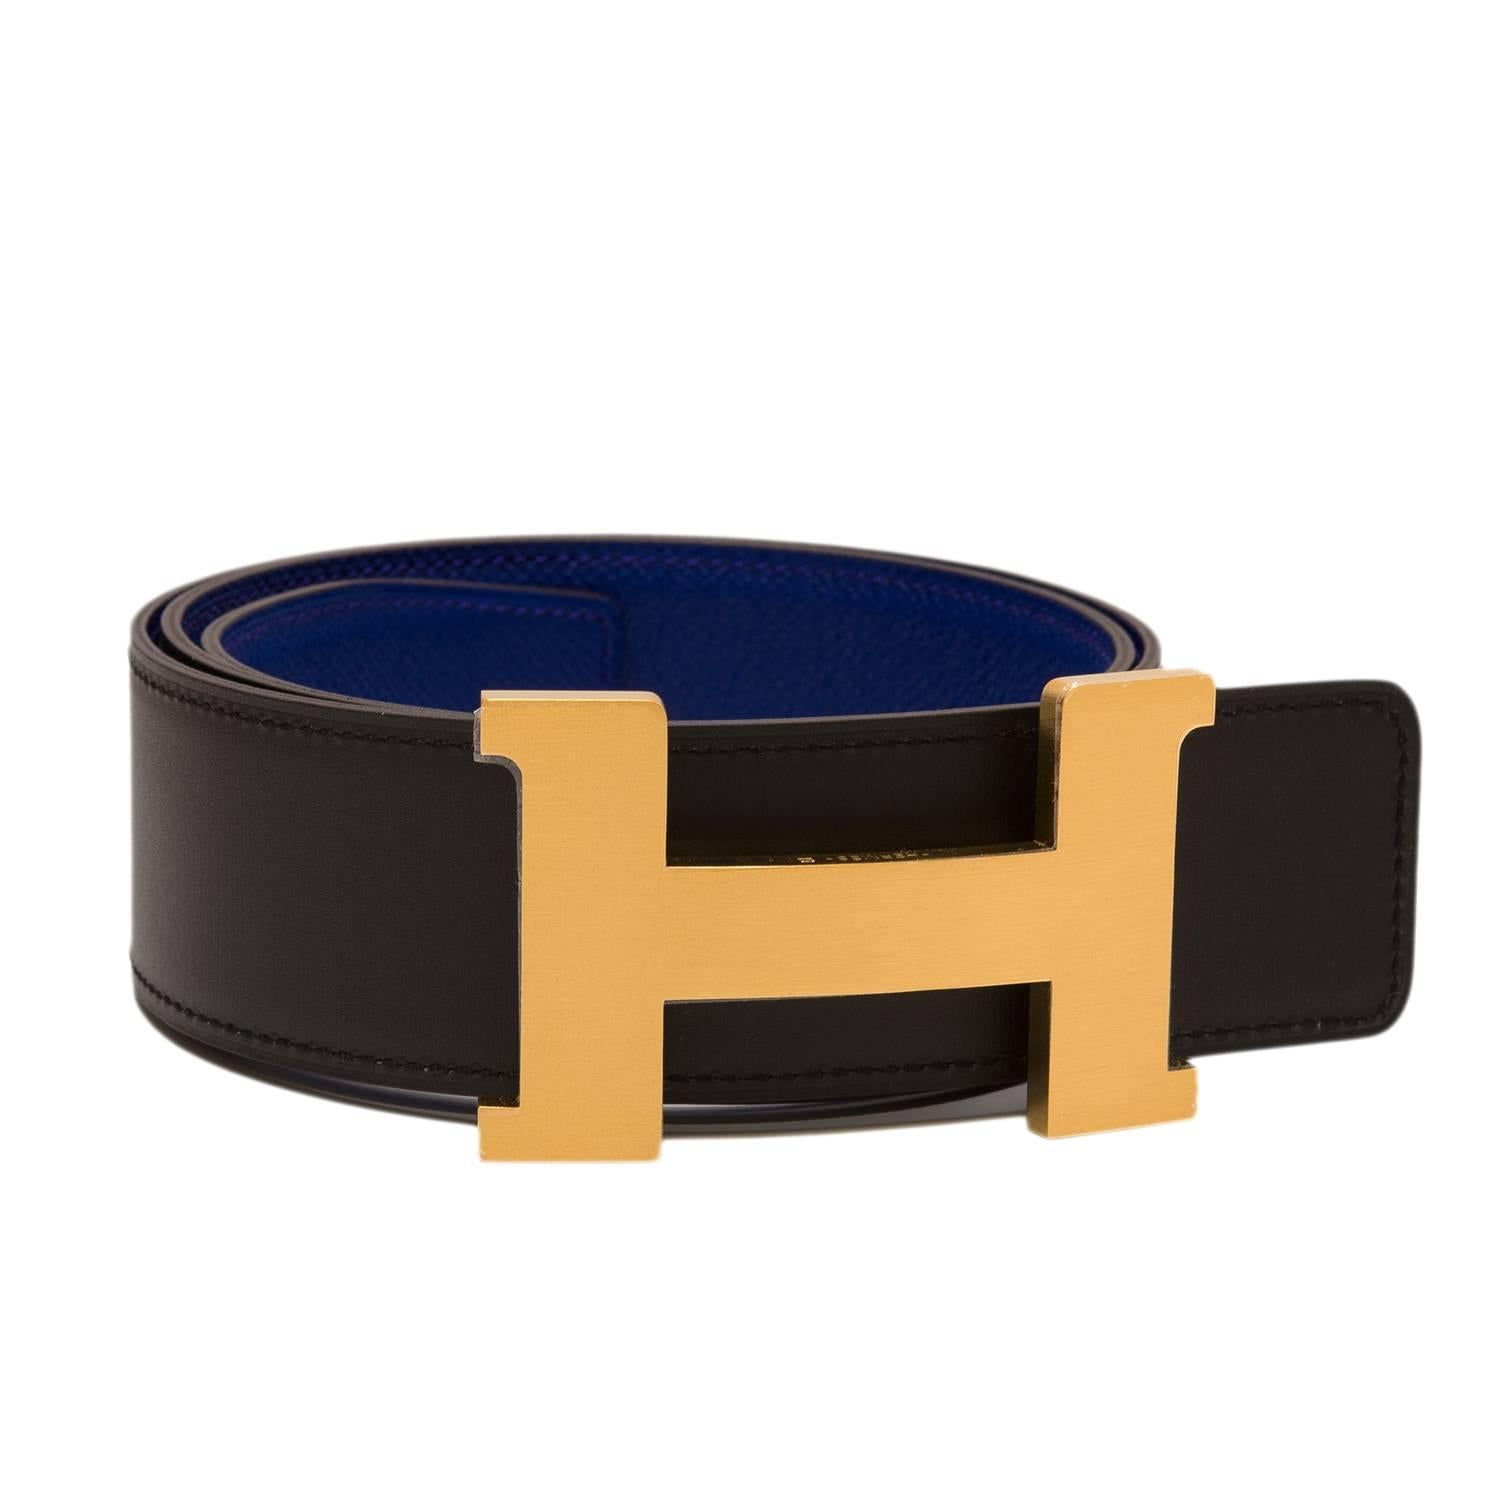 Hermes belt kit comprising an adjustable wide 42mm Constance H belt of blue electric epsom with tonal stitching reversing to black calfskin with tonal stitching accompanied by a removable brushed gold H buckle.

Origin: France

Condition: